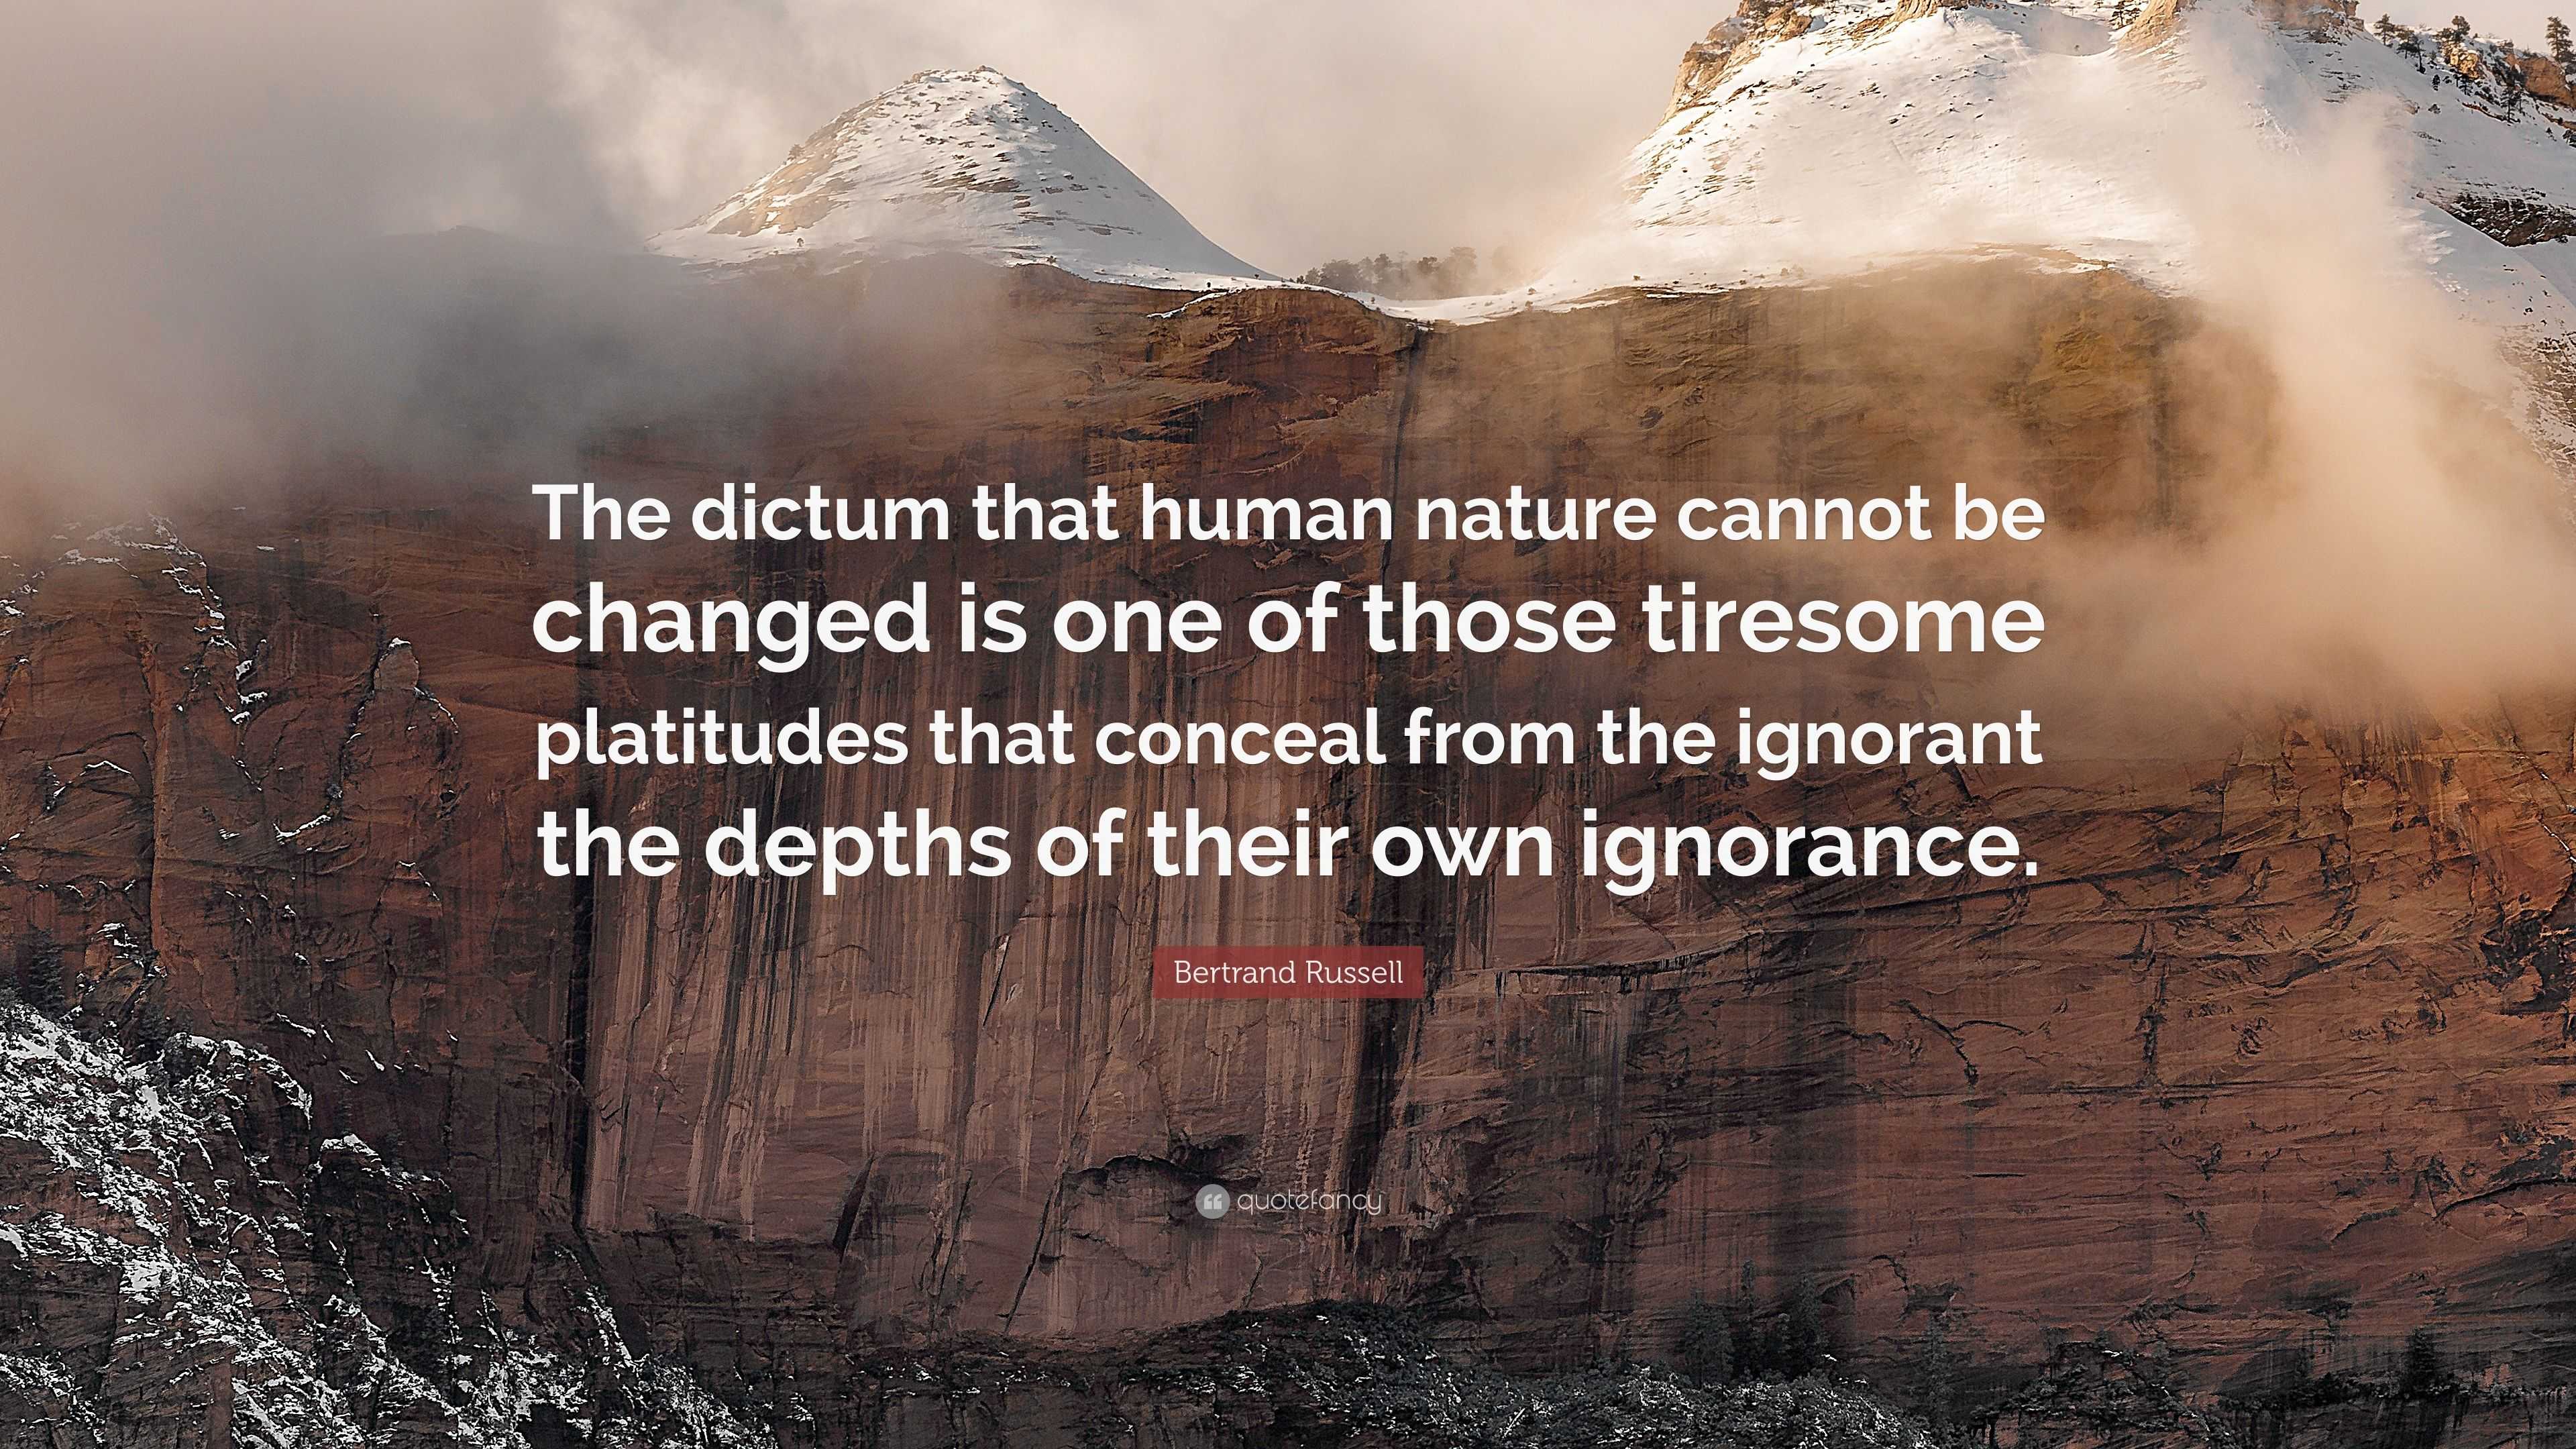 Bertrand Russell Quote: “The dictum that human nature be changed one of those tiresome platitudes that conceal from the ignorant the de...”